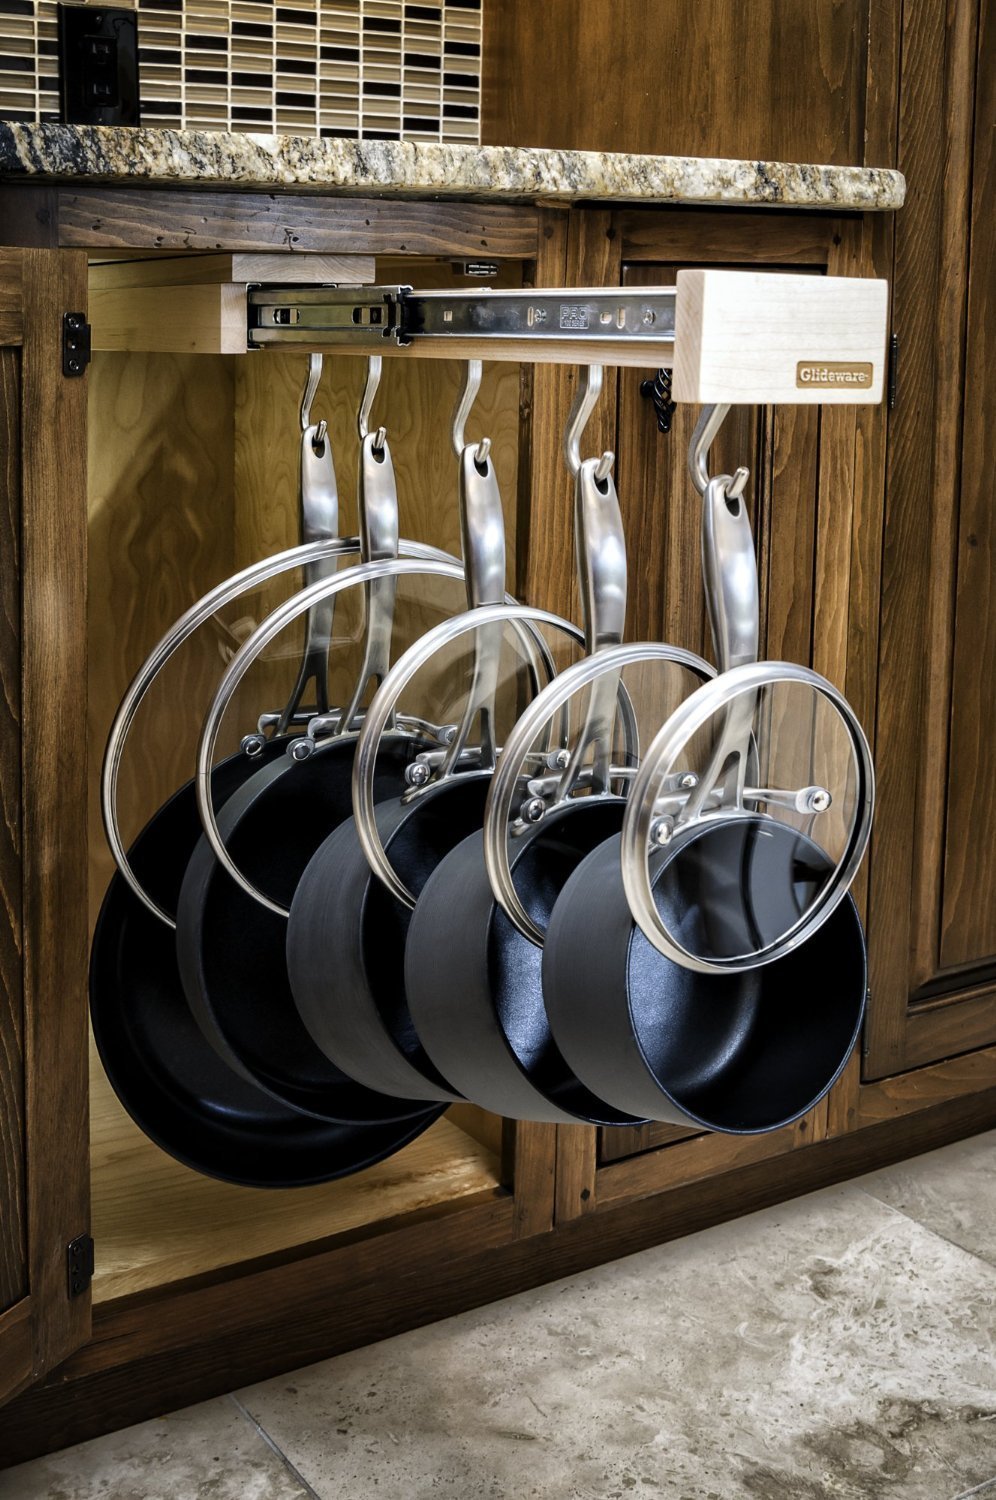 Organizing Pots And Pans Ideas Solutions, Hanging Pot Rack Cabinet